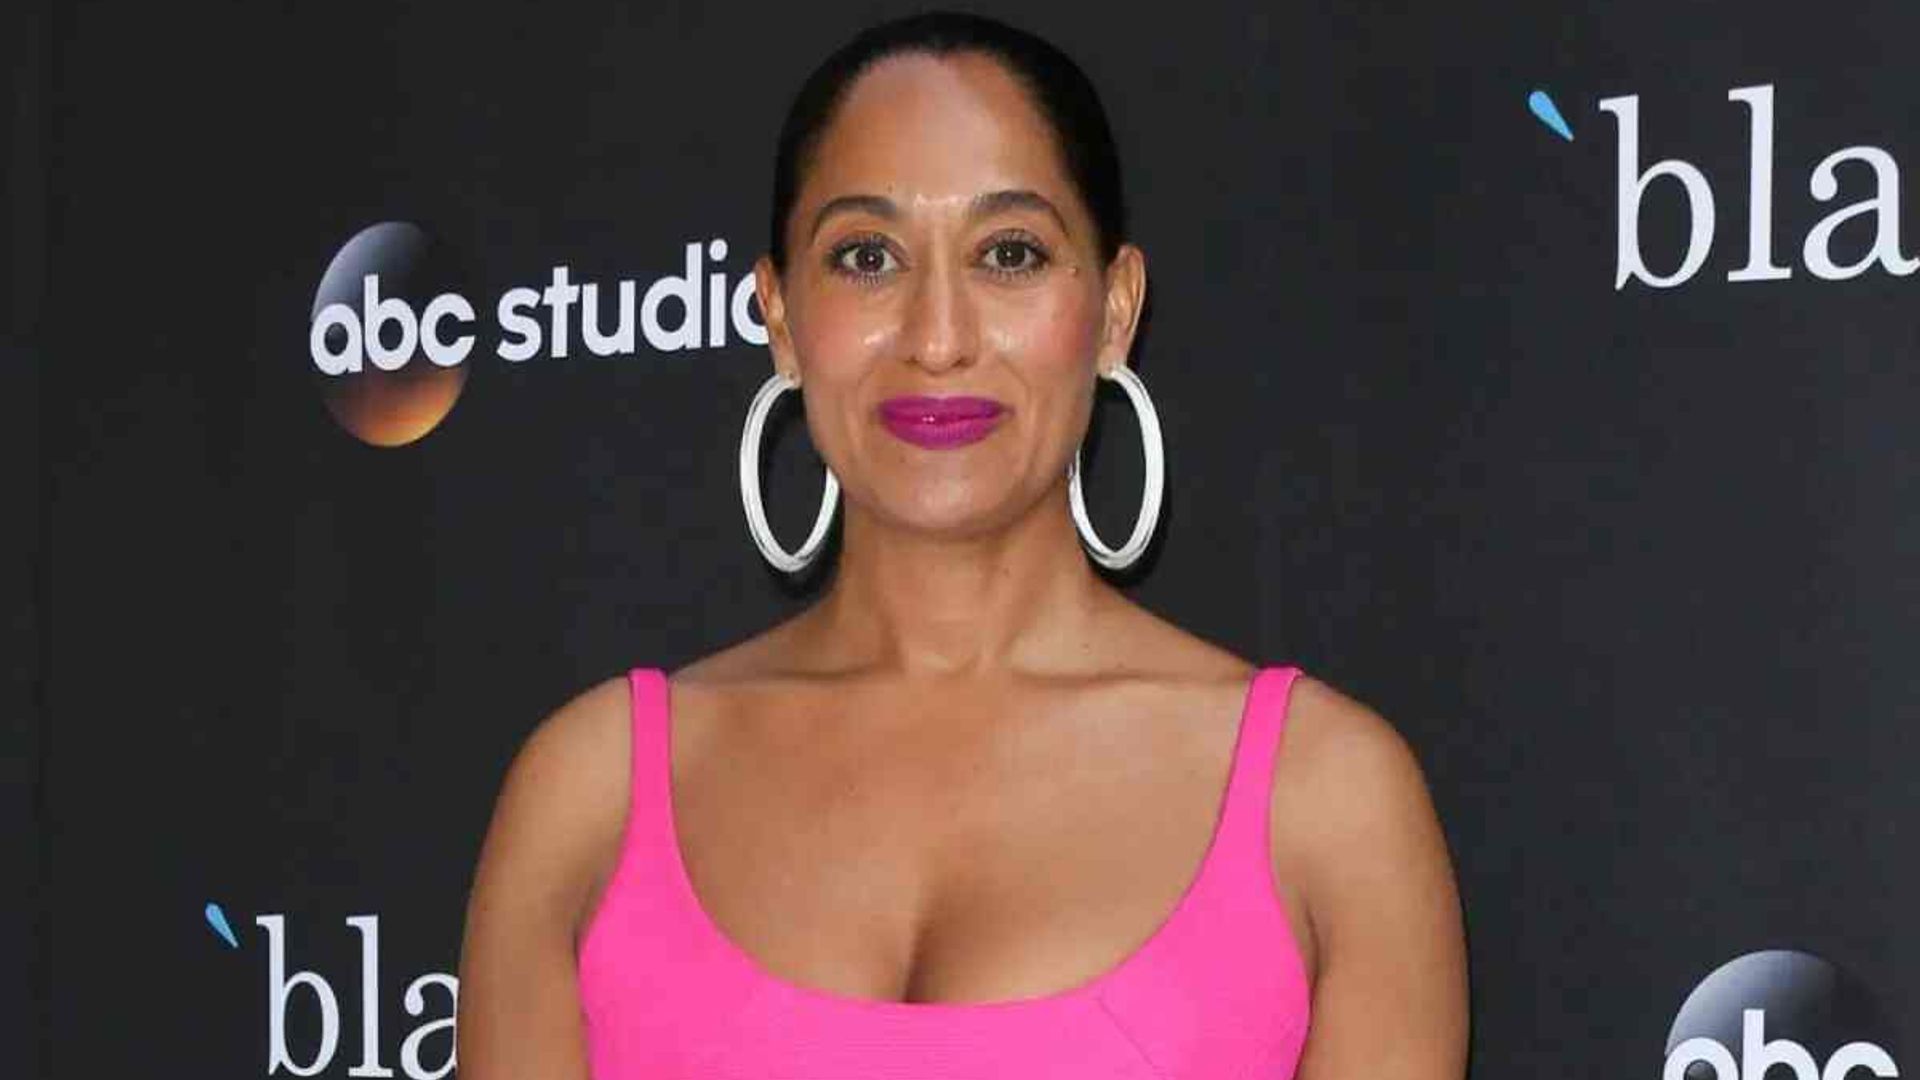 Tracee Ellis Ross looks radiant at Black-ish event wearing a pink dress